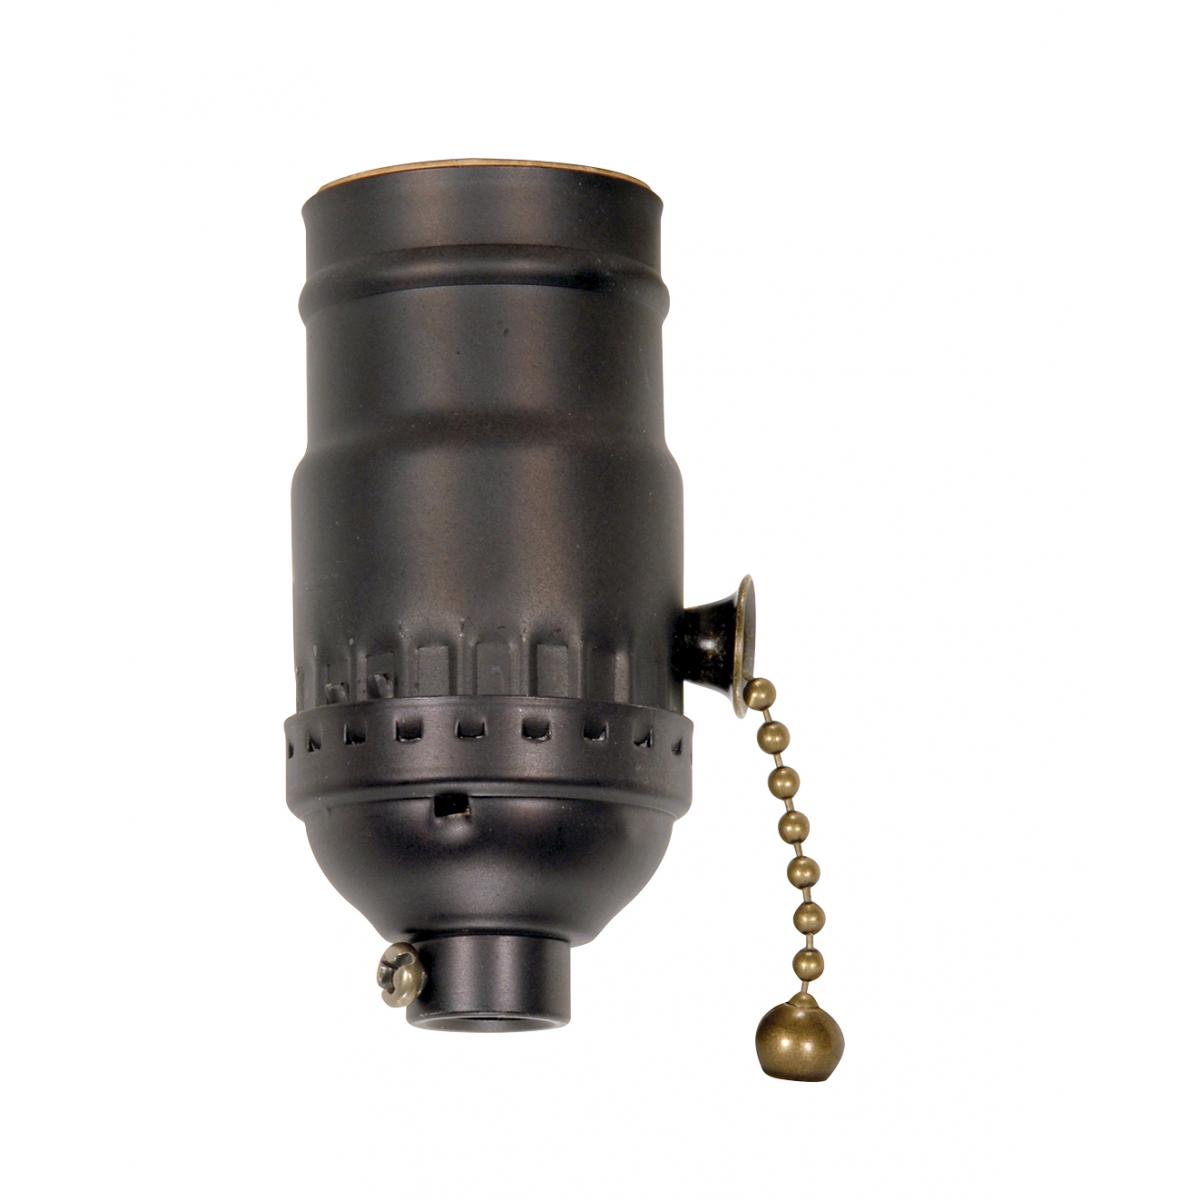 Satco 80-1740 On-Off Pull Chain Socket 1/8 IPS 3 Piece Stamped Solid Brass Dark Antique Brass Finish 660W 250V